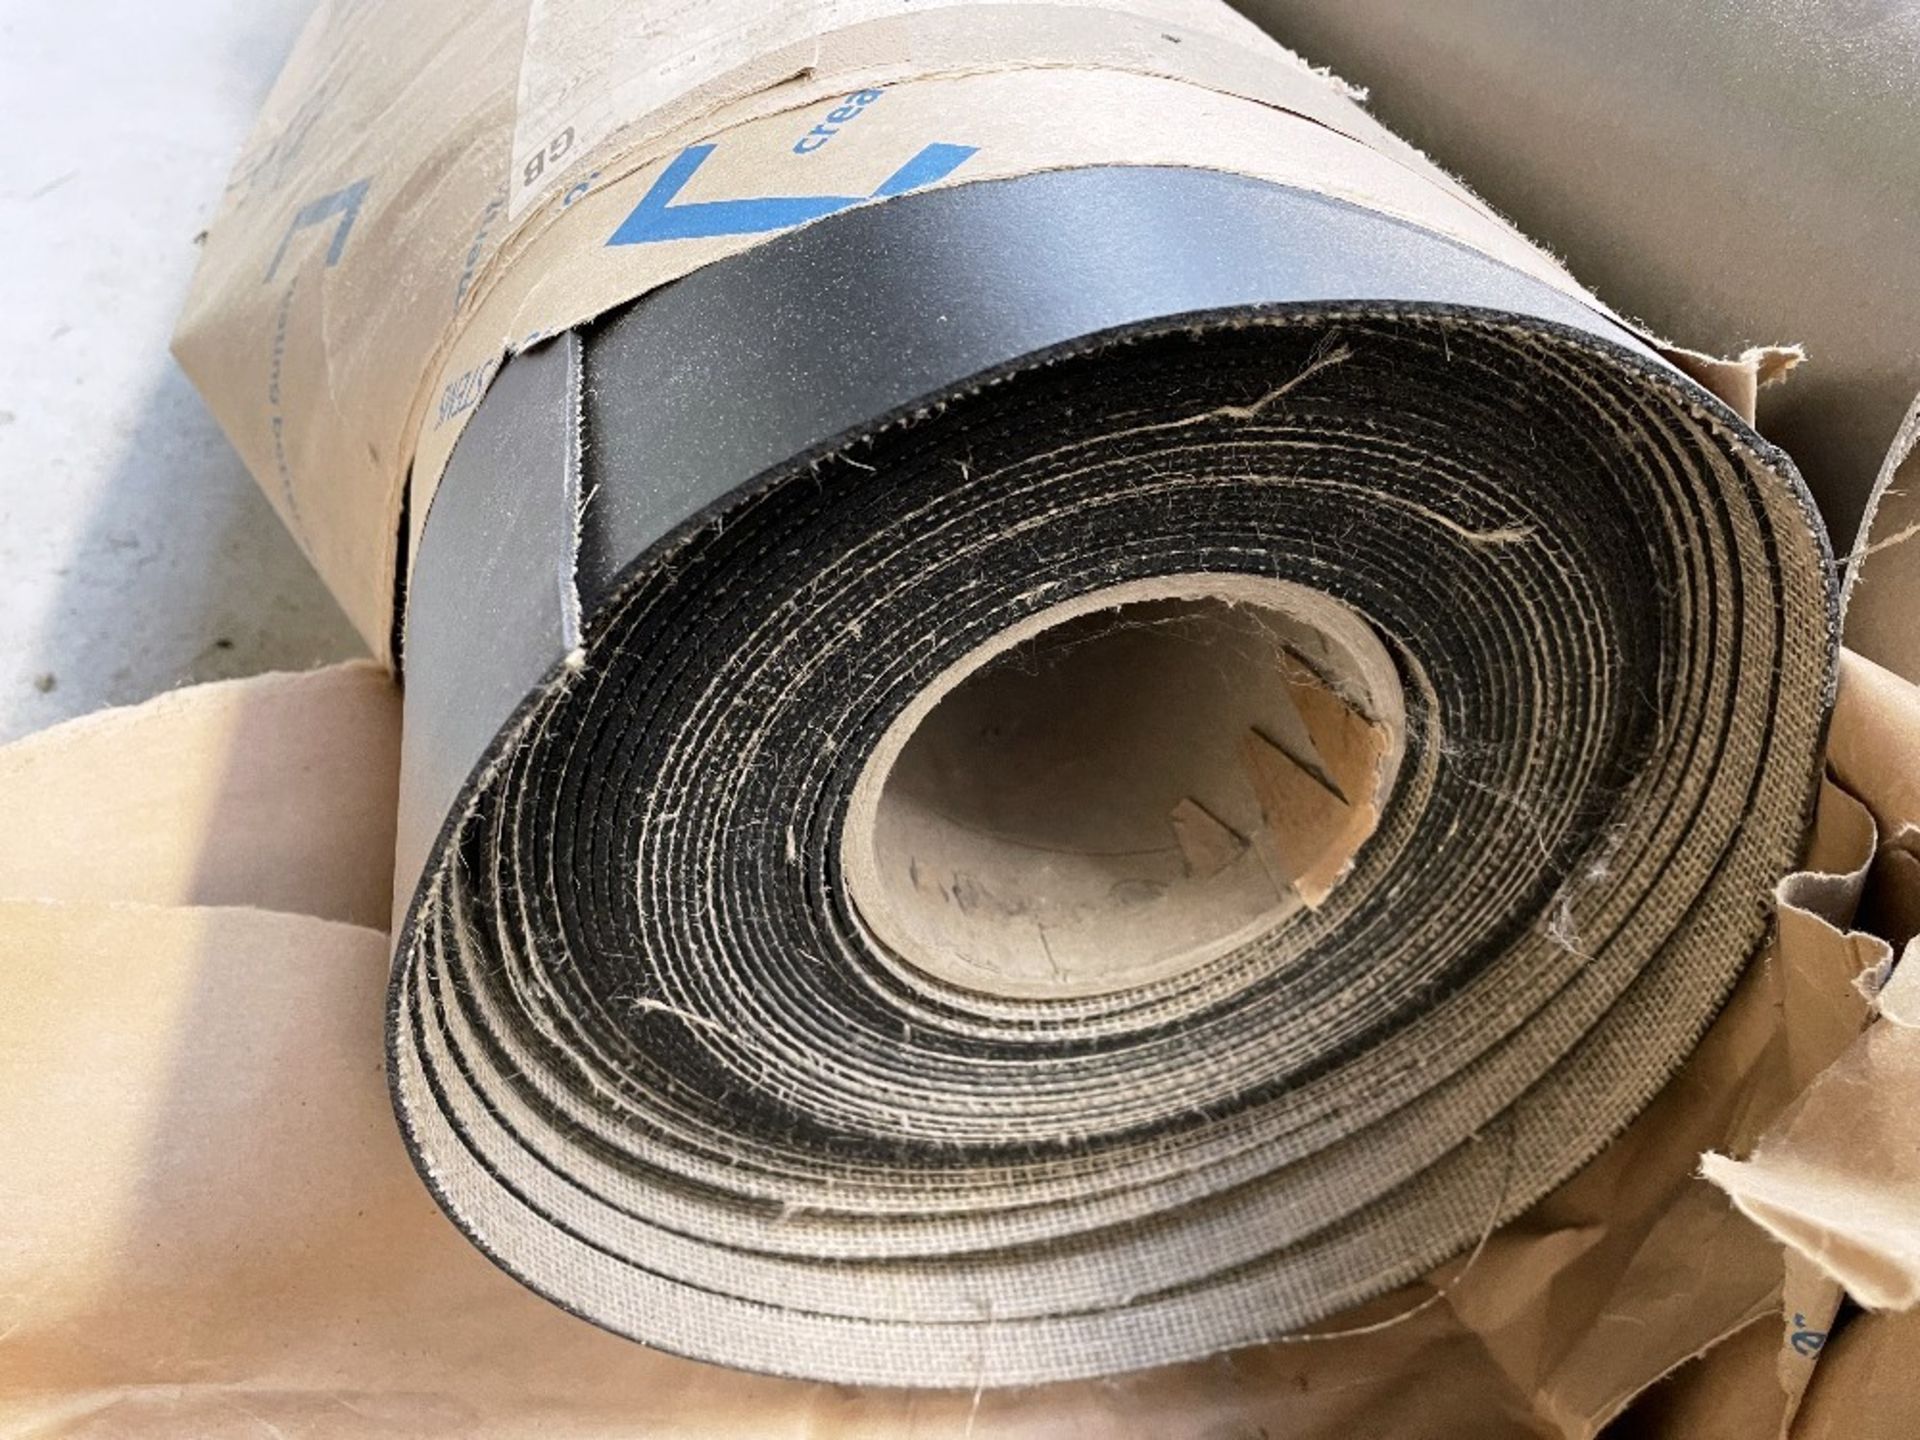 4 x Rolls of Various Rubber Flooring - As Pictured - Image 4 of 7